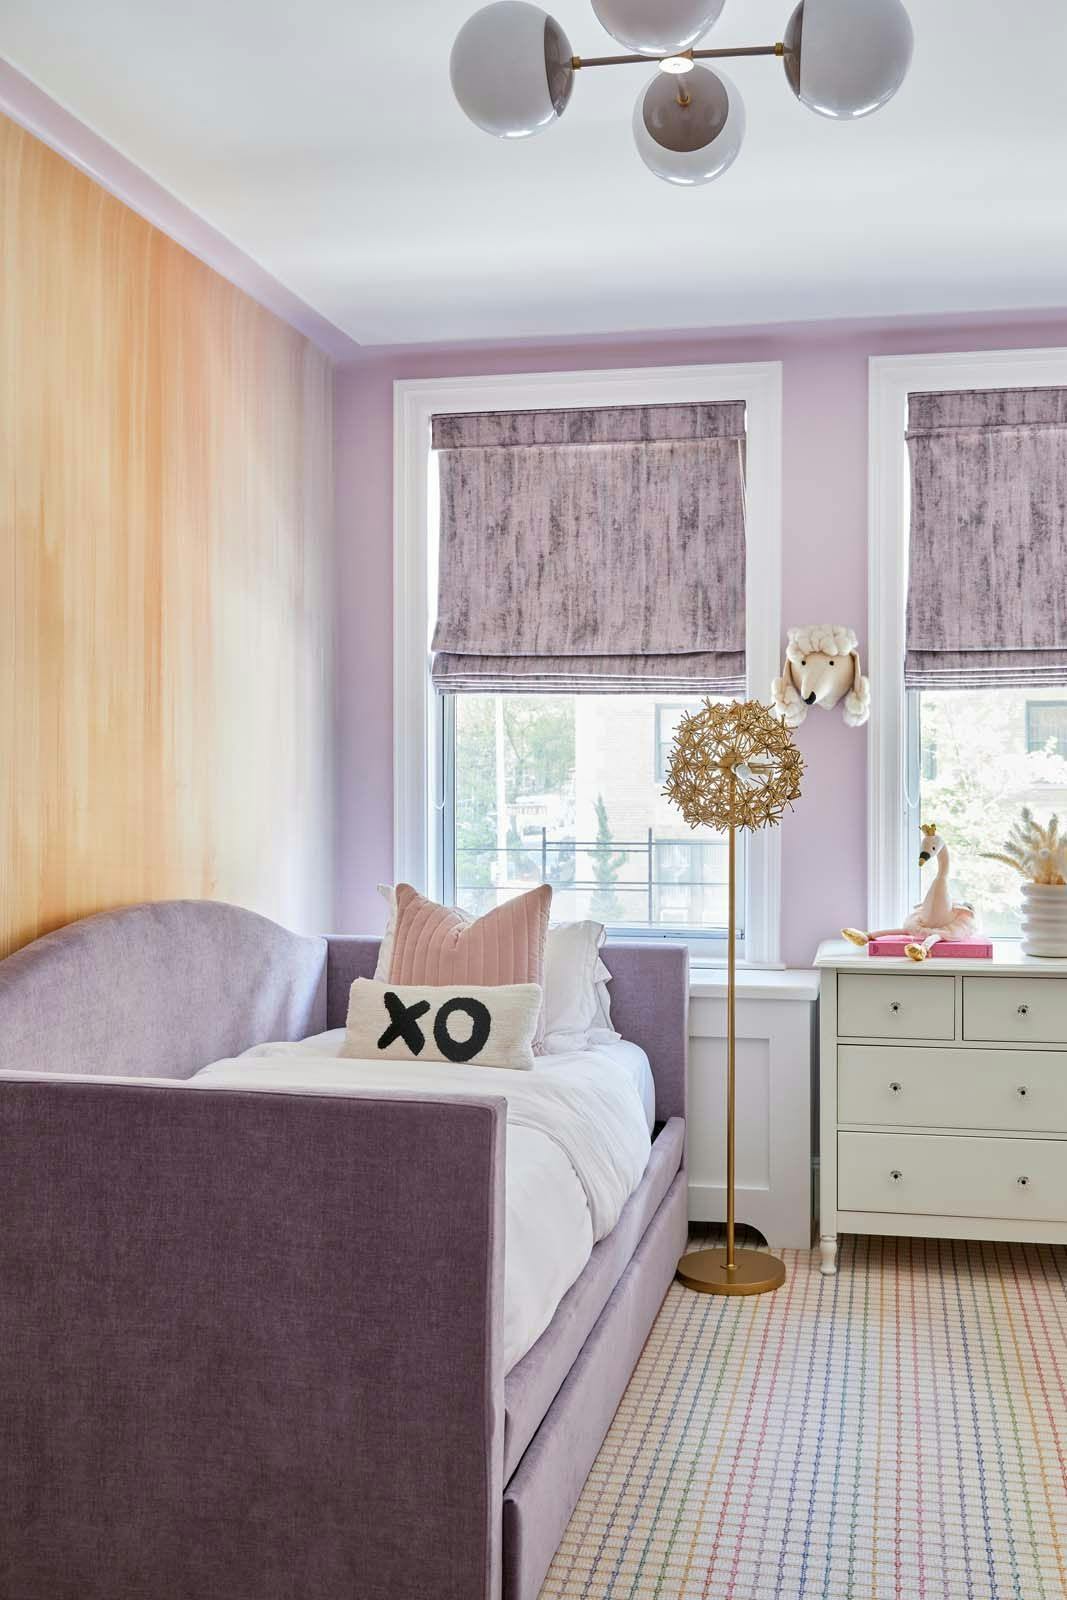 West End child's bedroom with purple accent